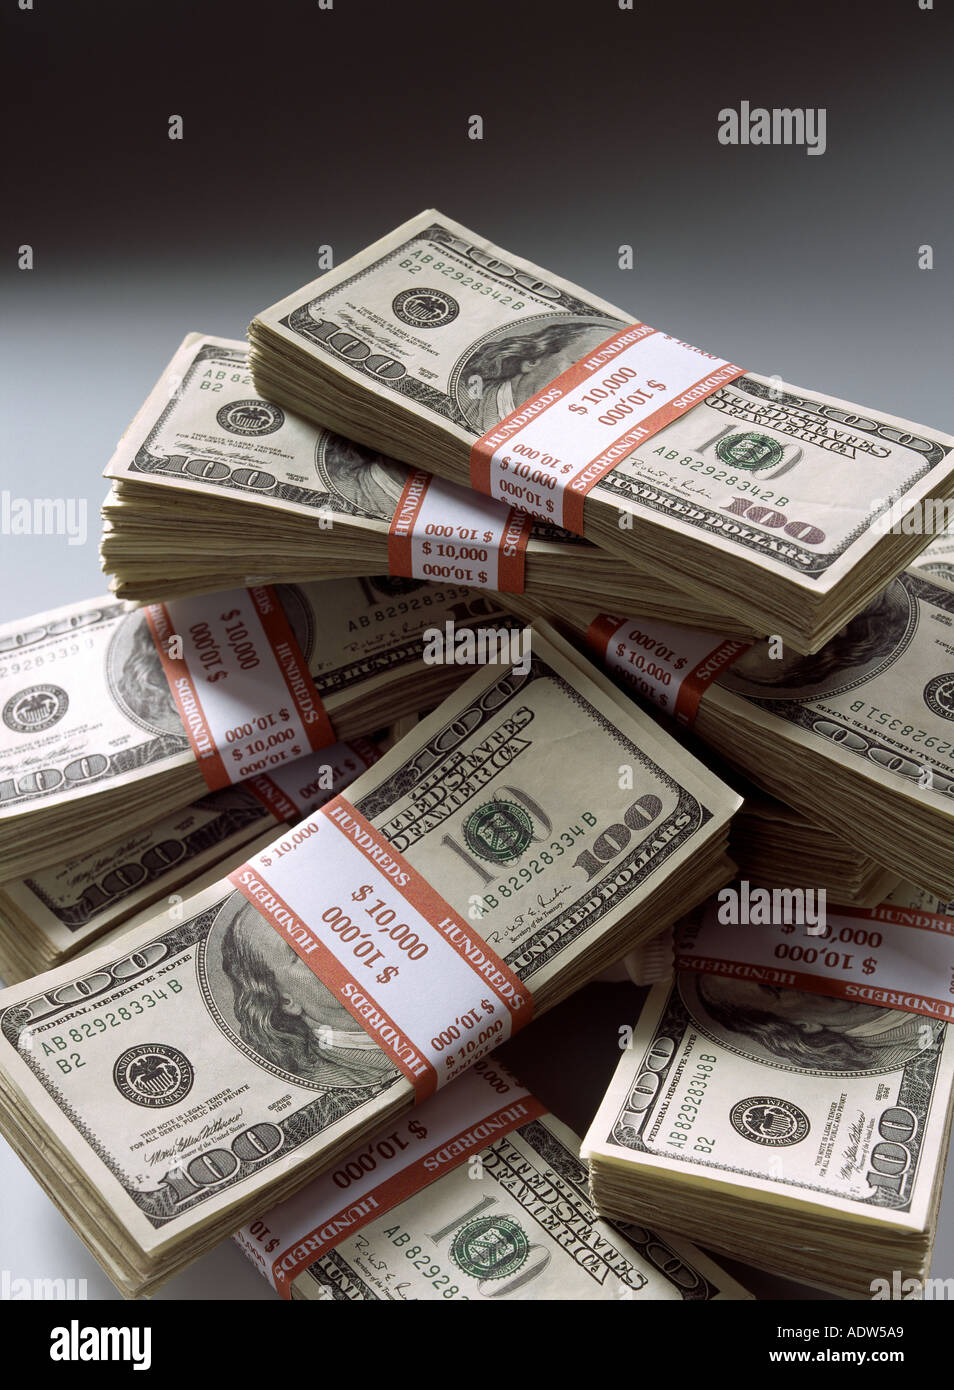 WADS OF 100 US DOLLARS BANKNOTES Stock Photo